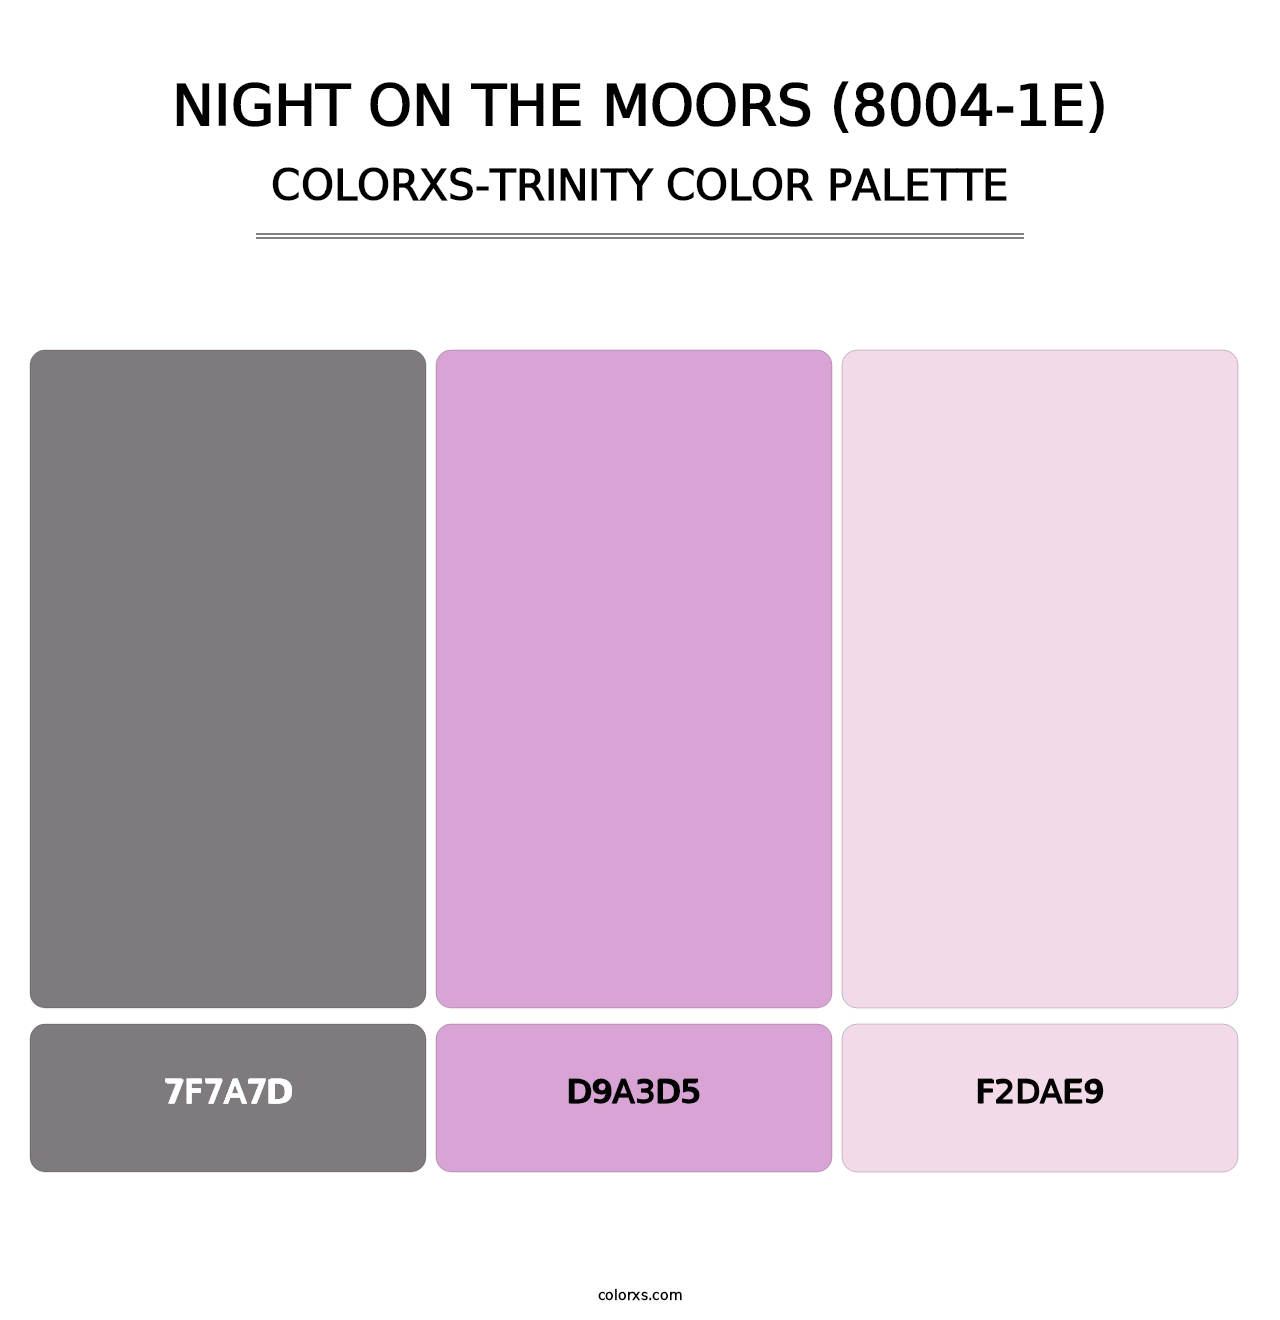 Night on the Moors (8004-1E) - Colorxs Trinity Palette